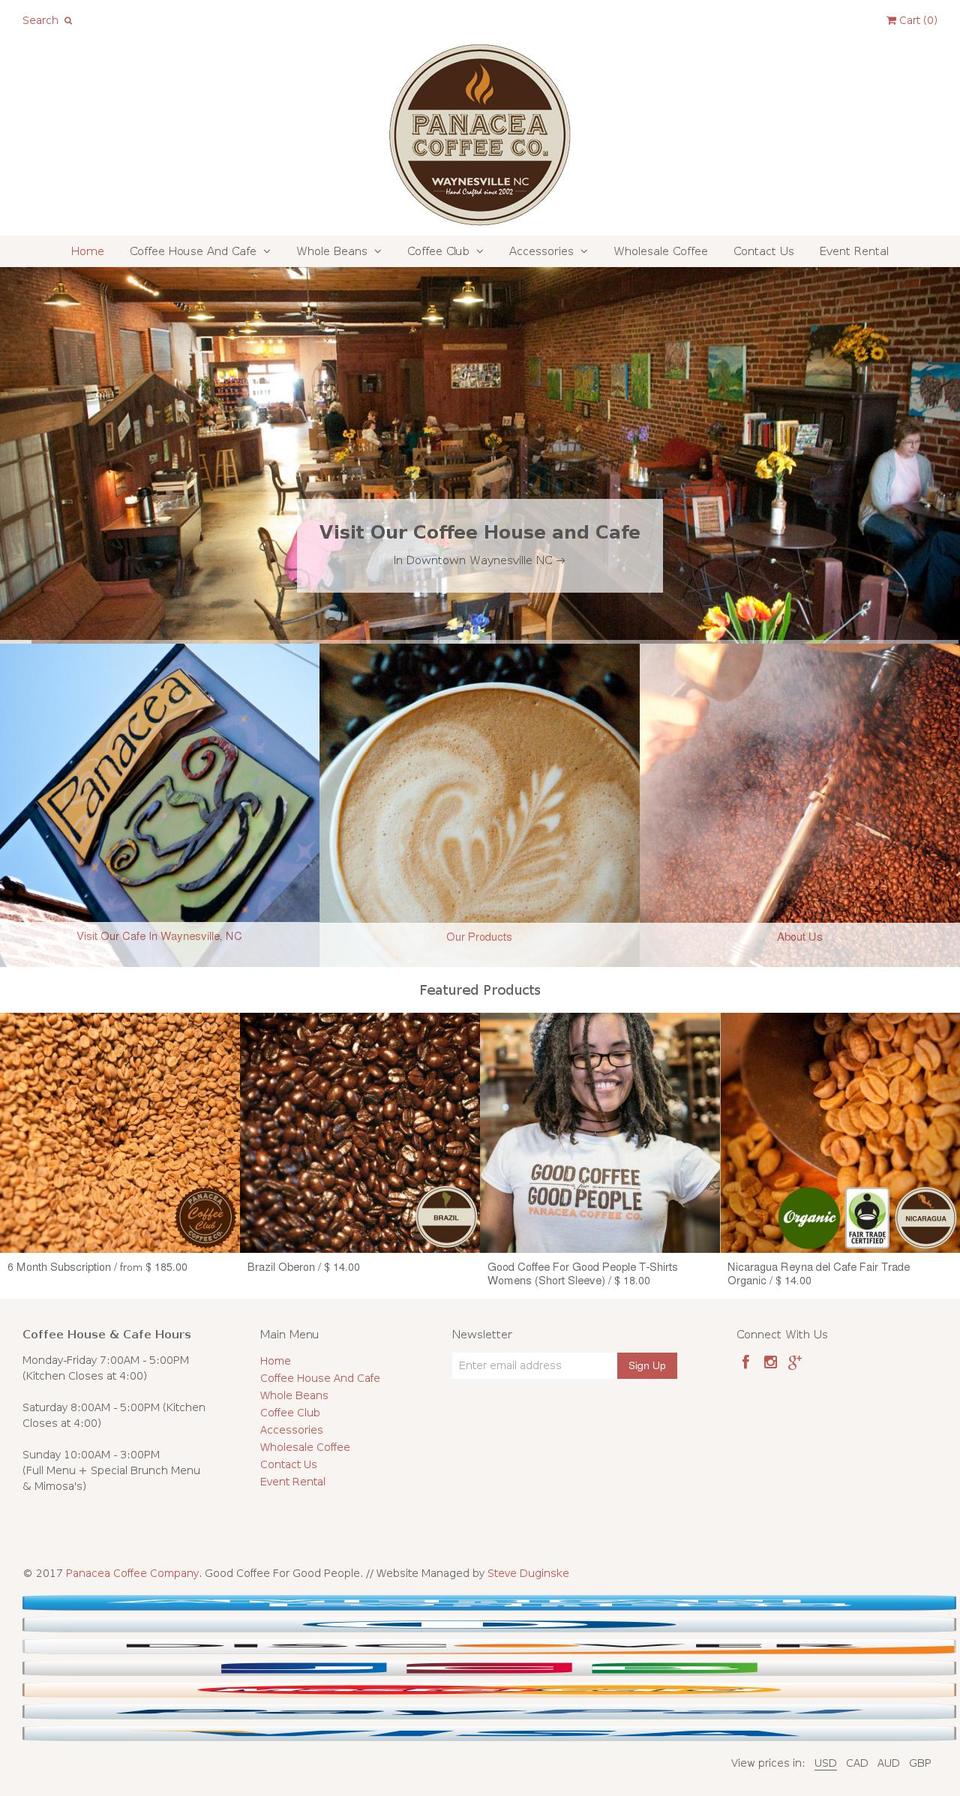 Weekend Shopify theme site example panaceacoffee.com